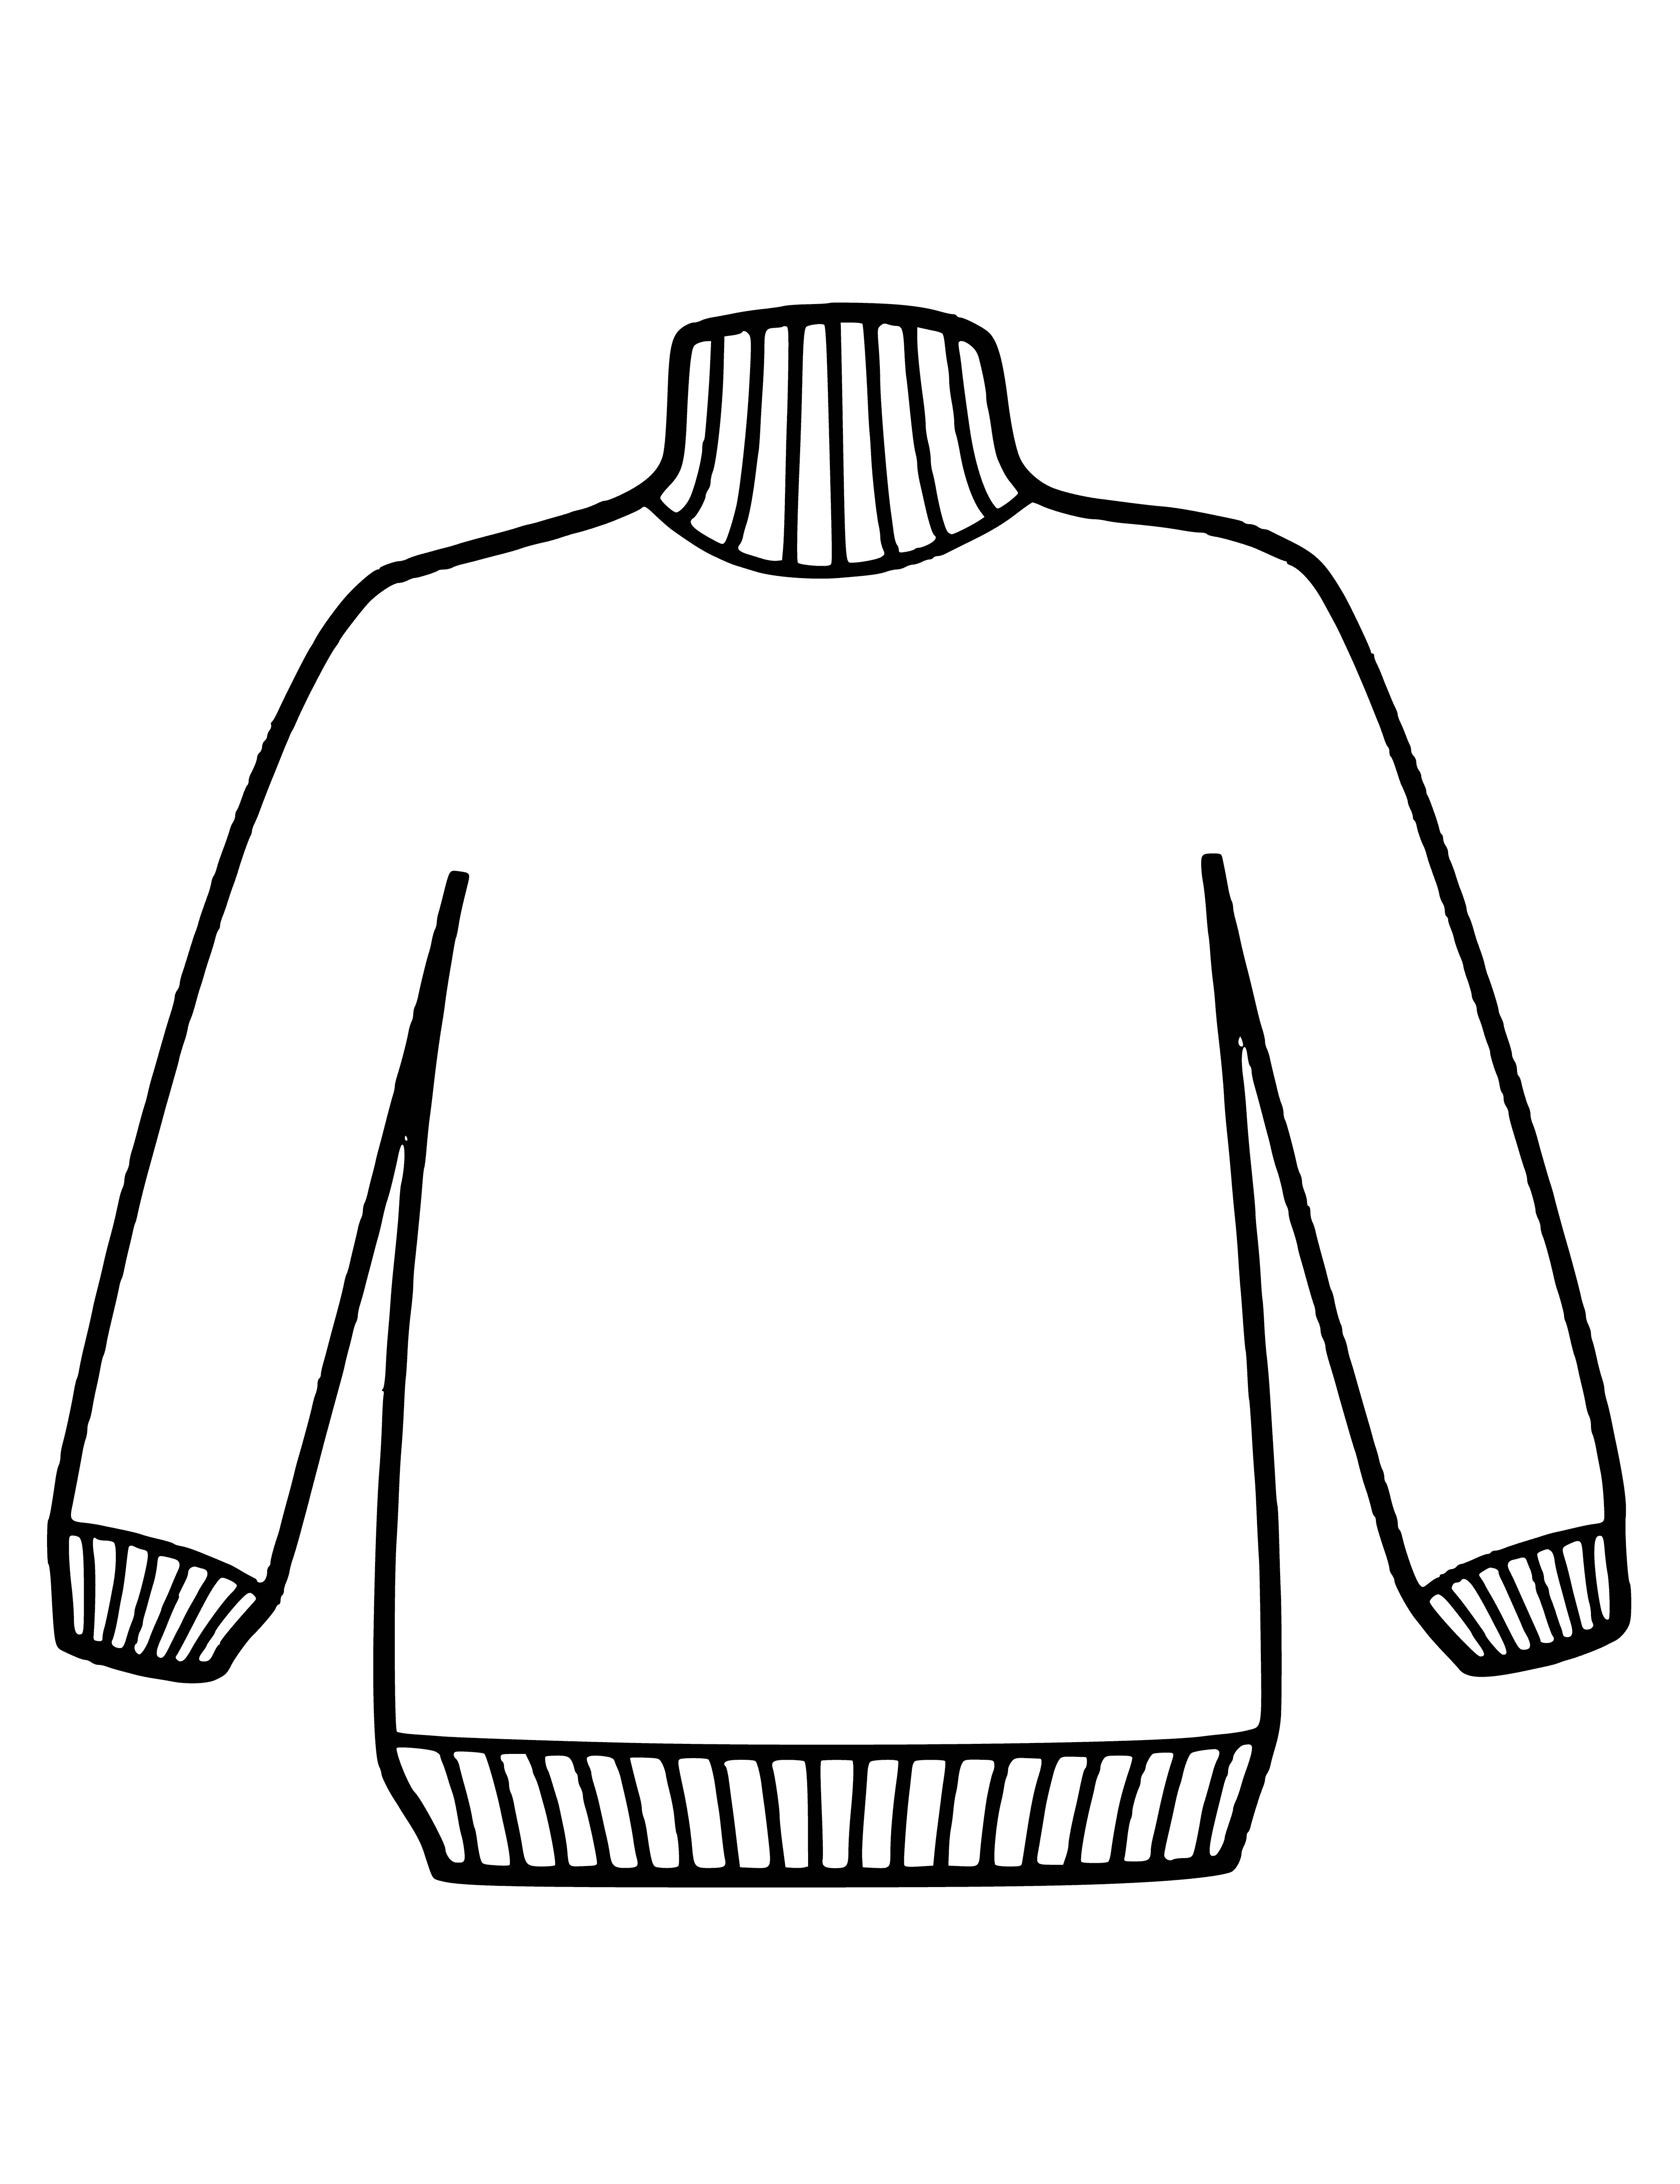 coloring page: Man coloring paged wearing a light grey V-neck sweater with dark grey stripes down chest and sleeves.